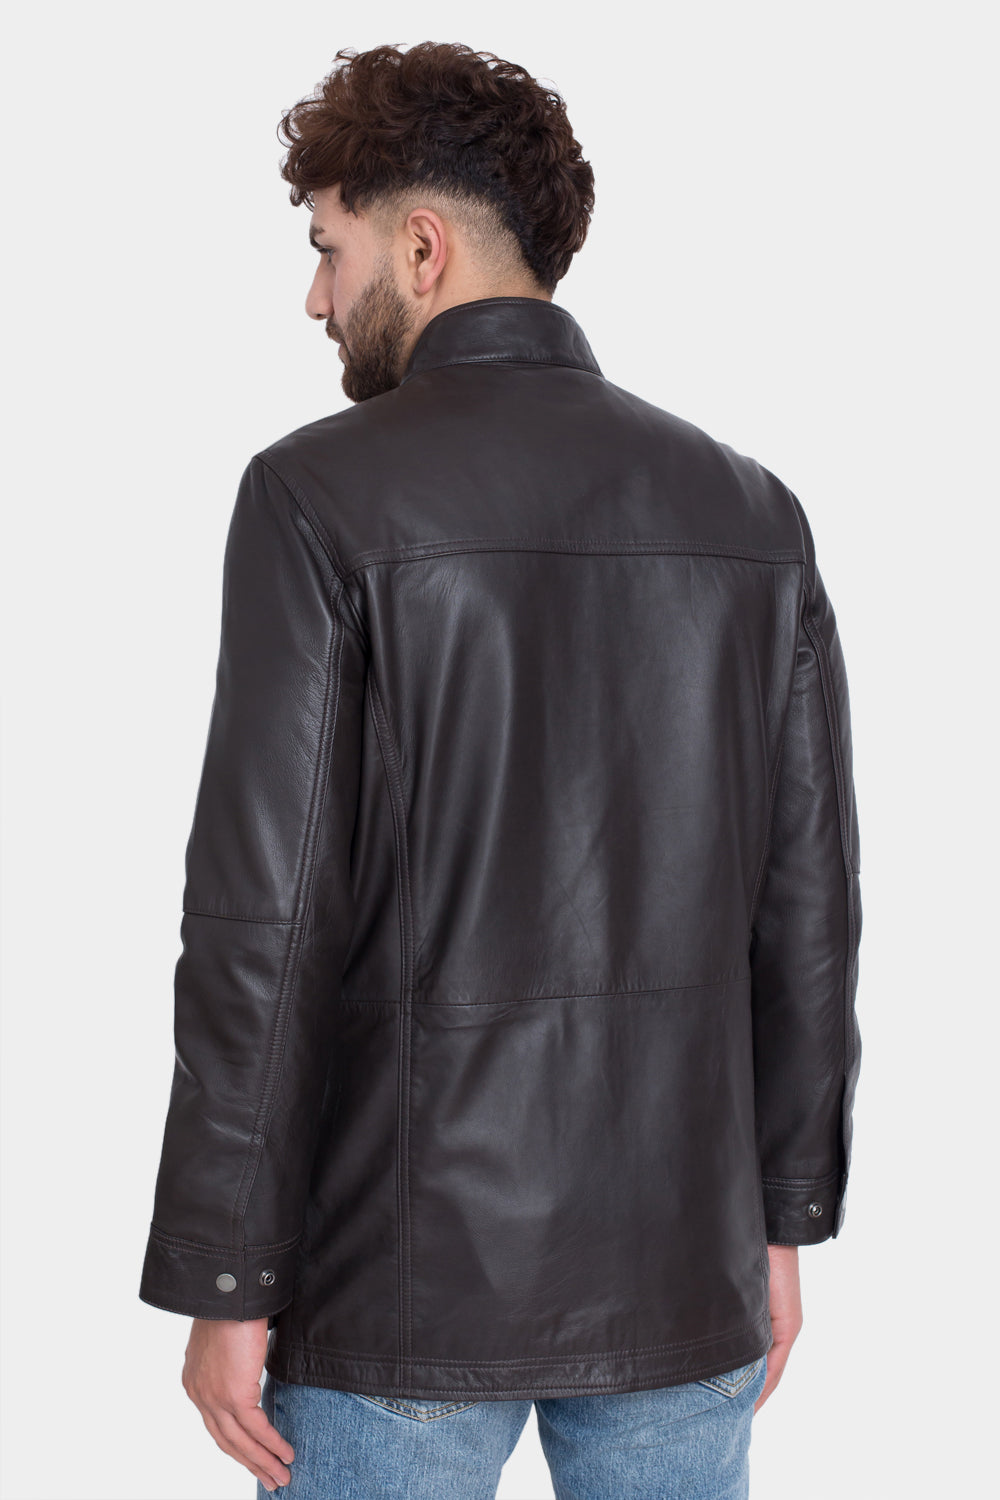 Justanned Sun-Tanned Leather Jacket